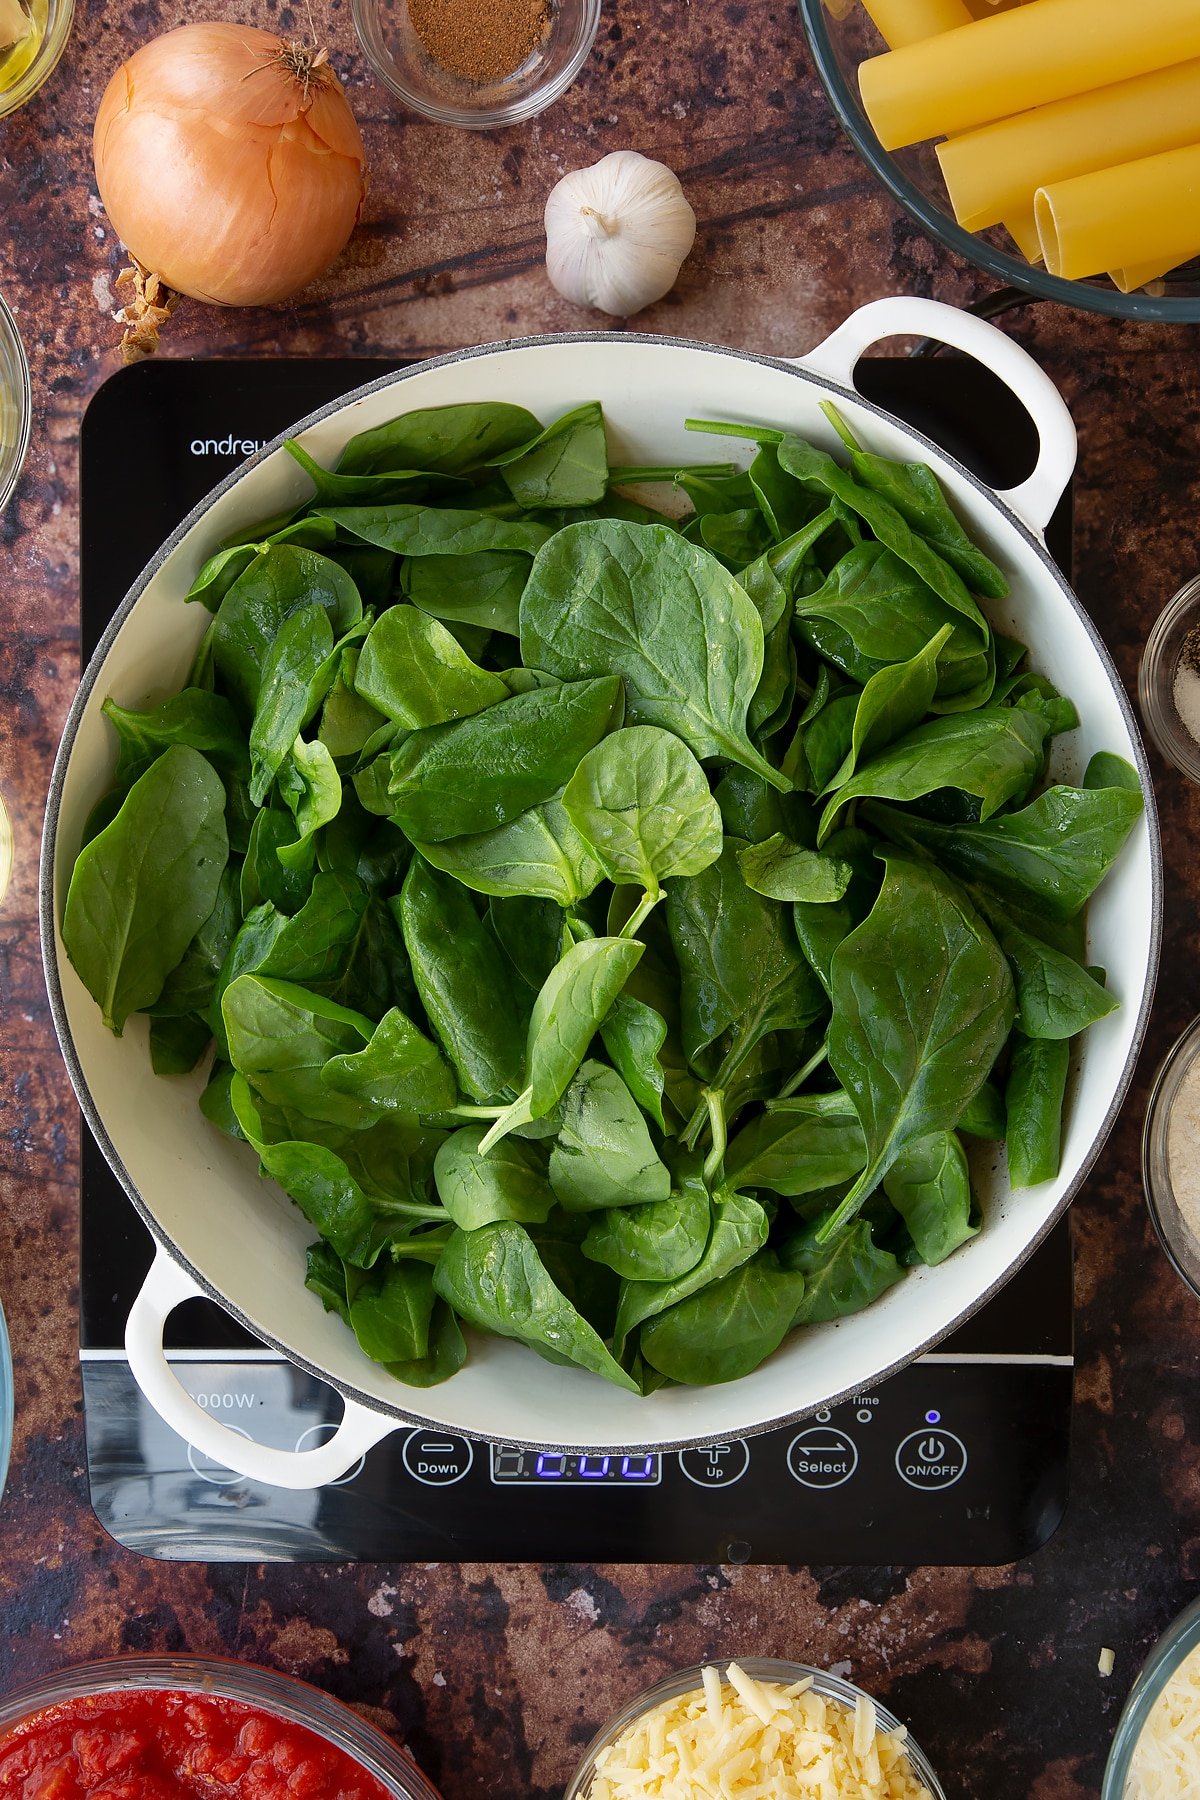 Overhead shot of the spinach inside a pan being cooked on an induction hob.